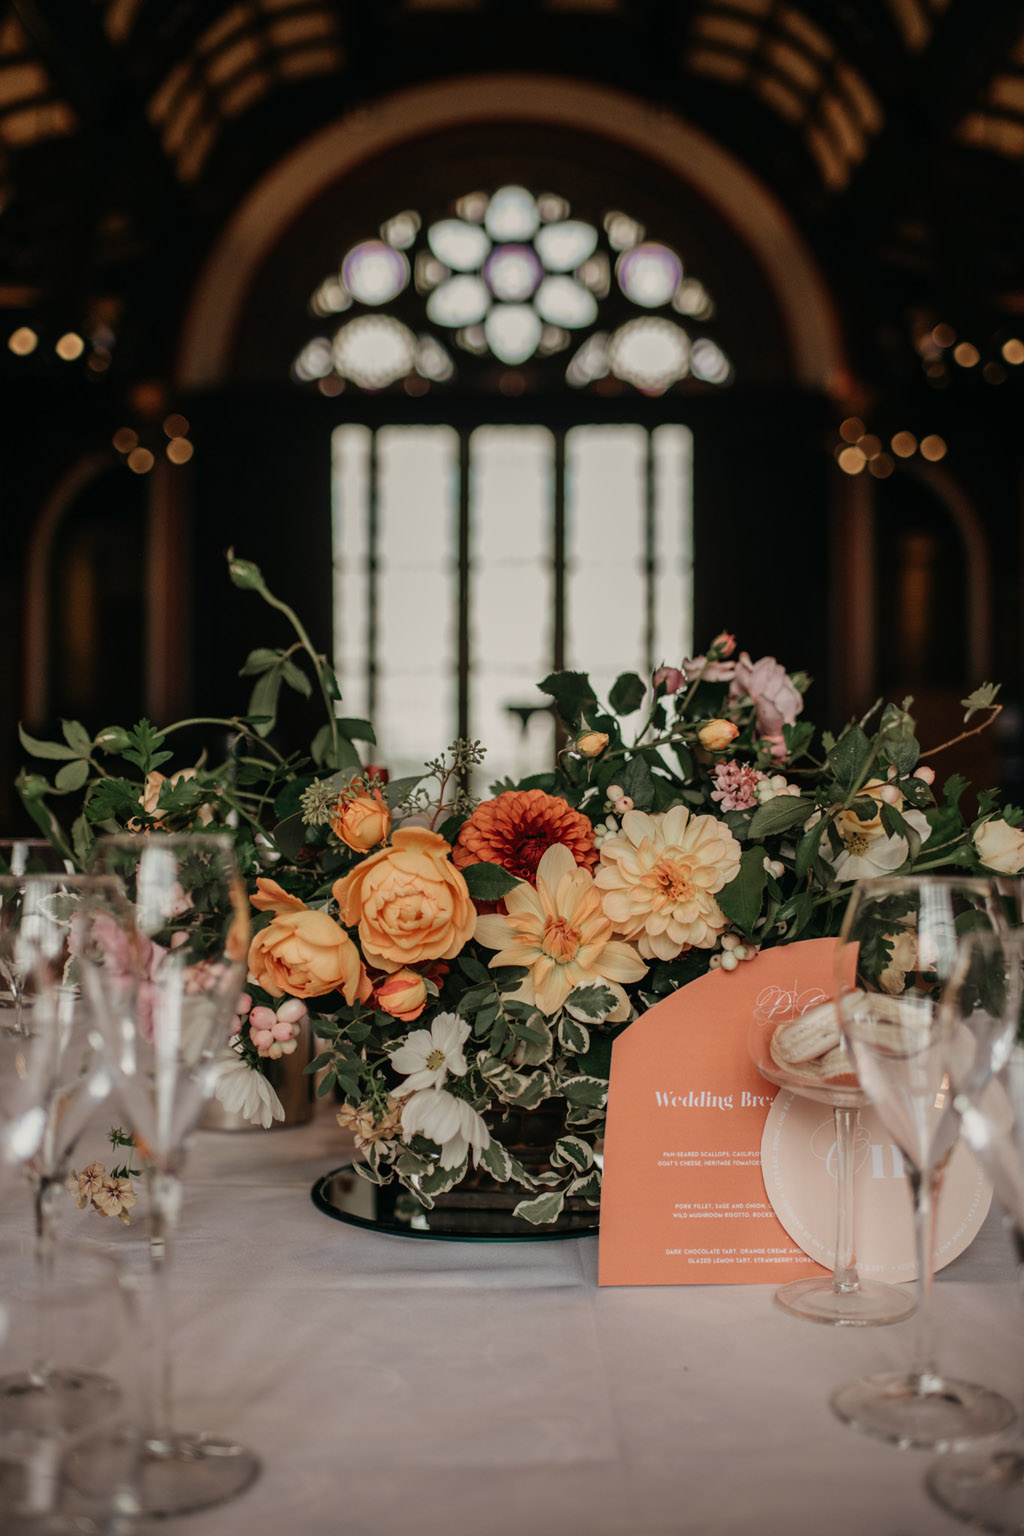  Traditional wedding inspiration with a modern twist, image credit Lottie Photography (4)